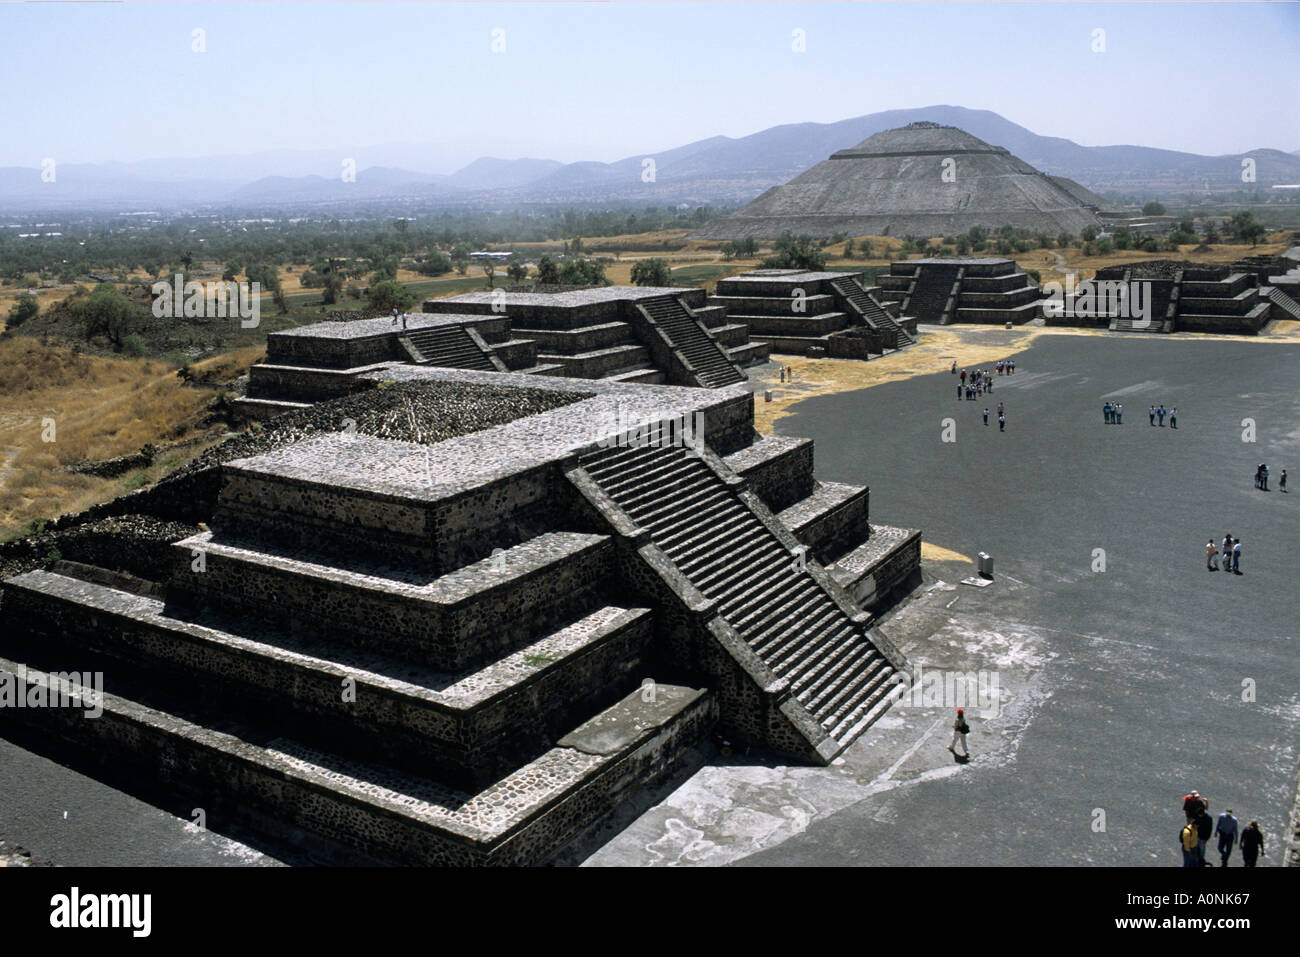 Teotihuacan, Mexico. The Plaza of the Sun and the Moon; pre-Aztec pyramid temples. Stock Photo